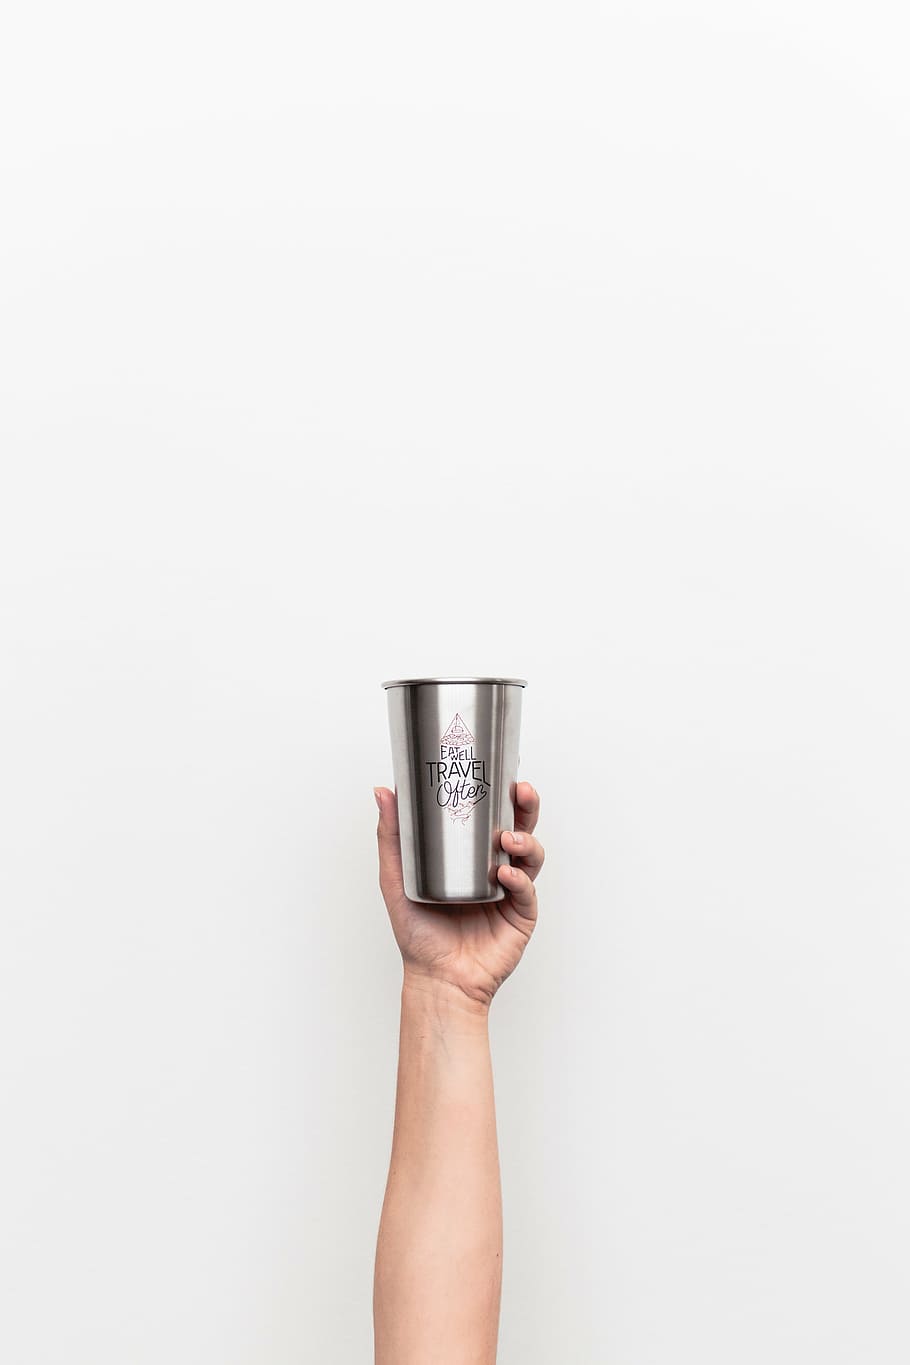 person holding gray Travel stainless steel drinking cup, white, HD wallpaper